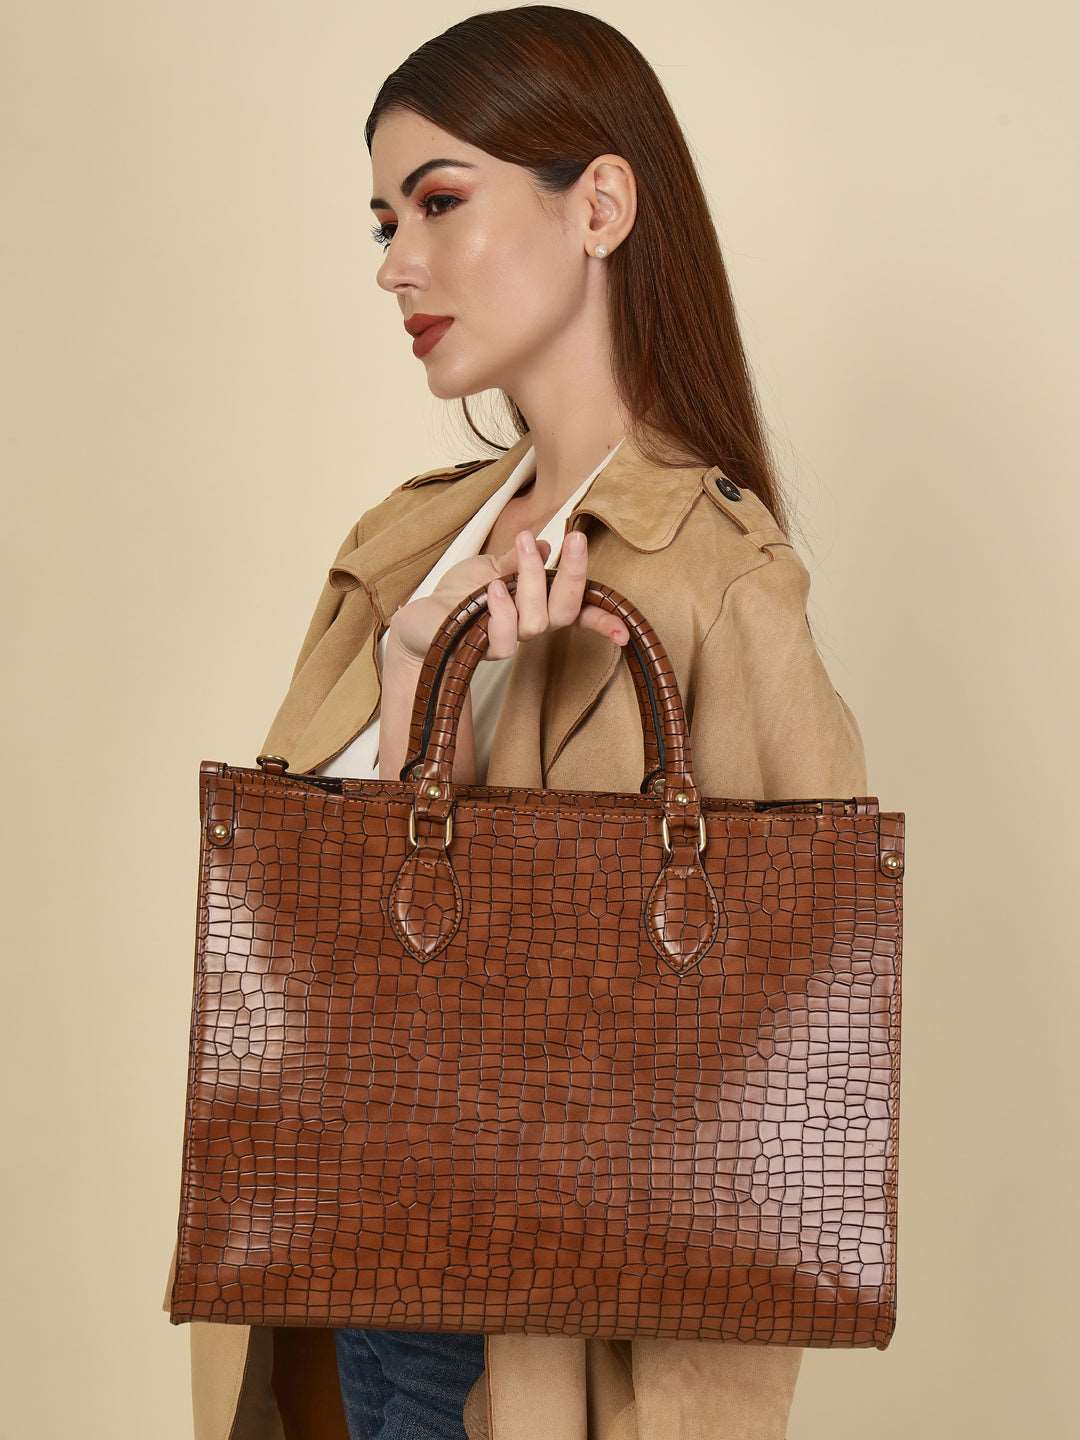 THE GUSTO Tote Bags : Buy THE GUSTO Colossal Tote Tan Medium Online